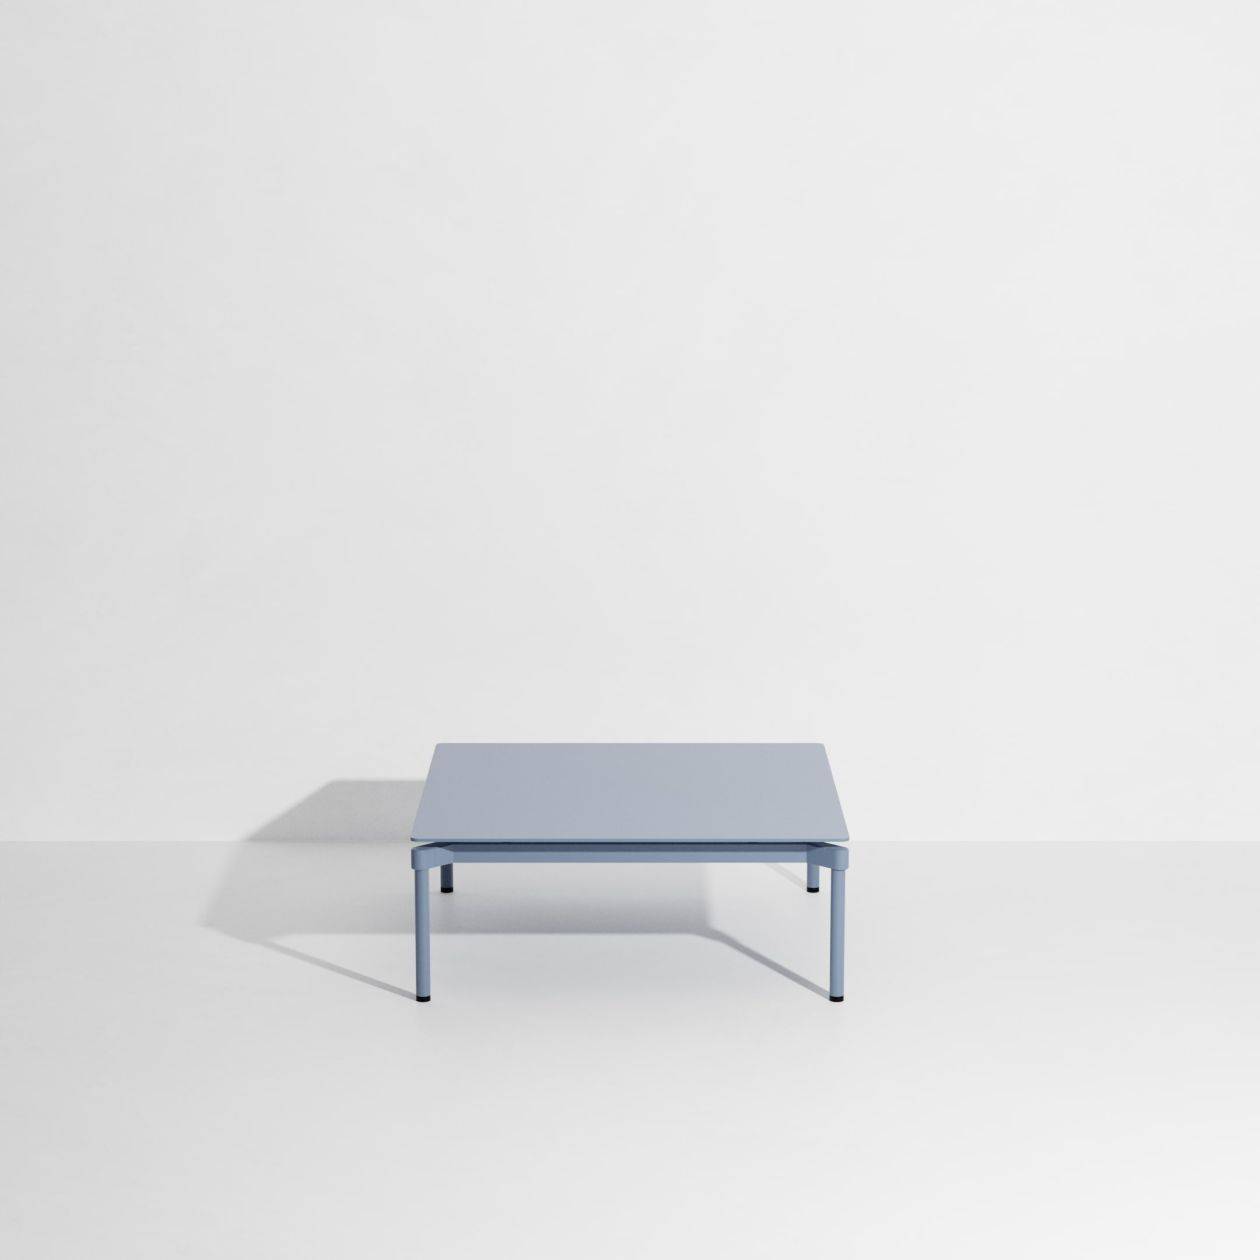 Fromme Coffee Table - Pigeon blue